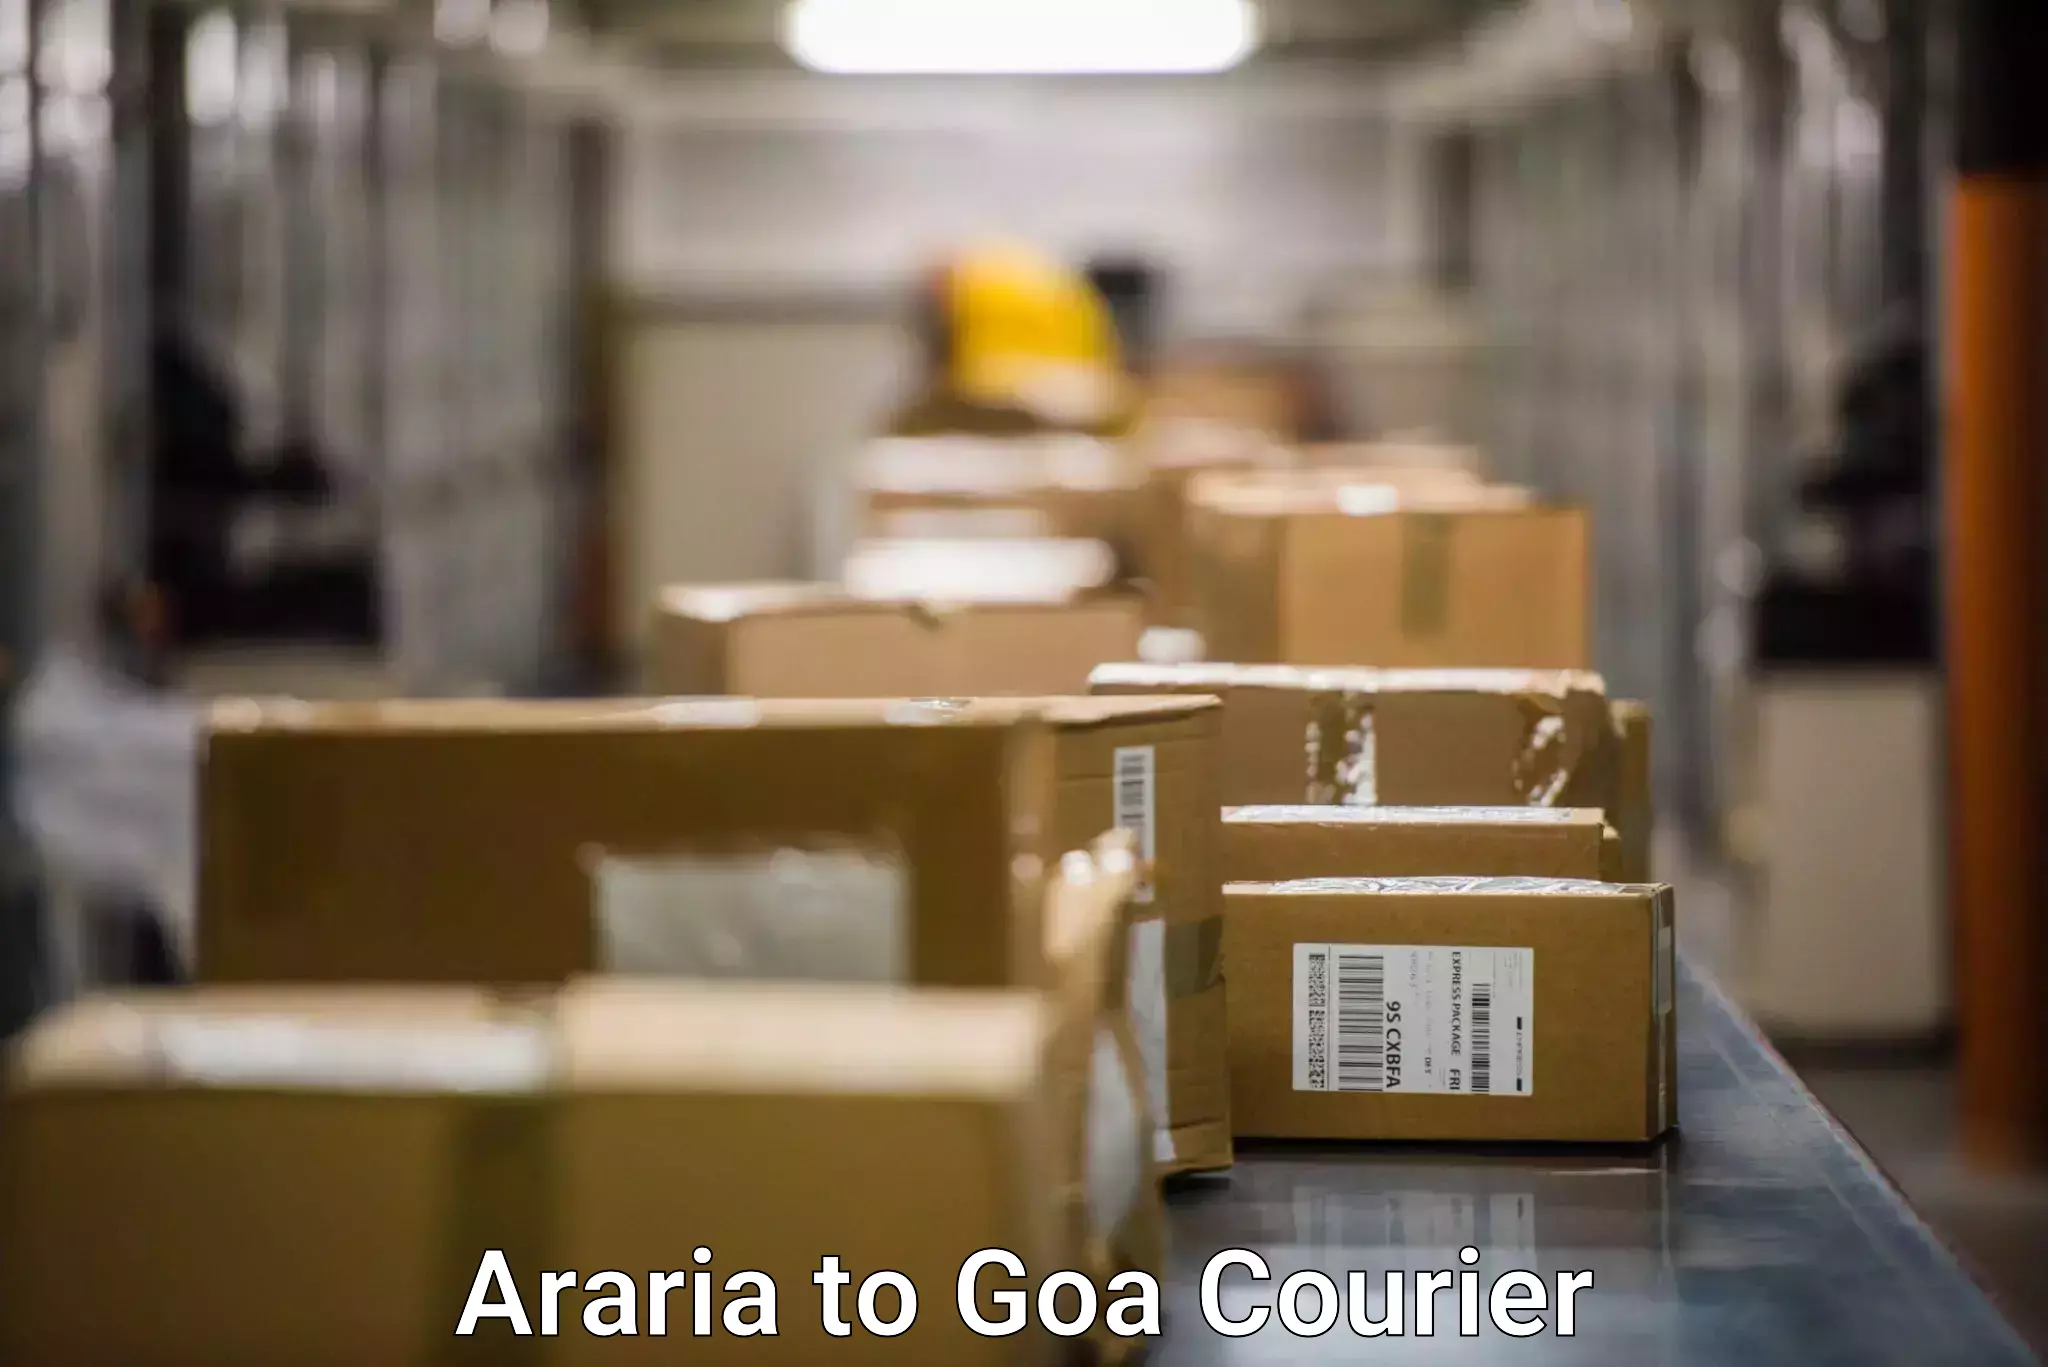 Same-day delivery options Araria to Goa